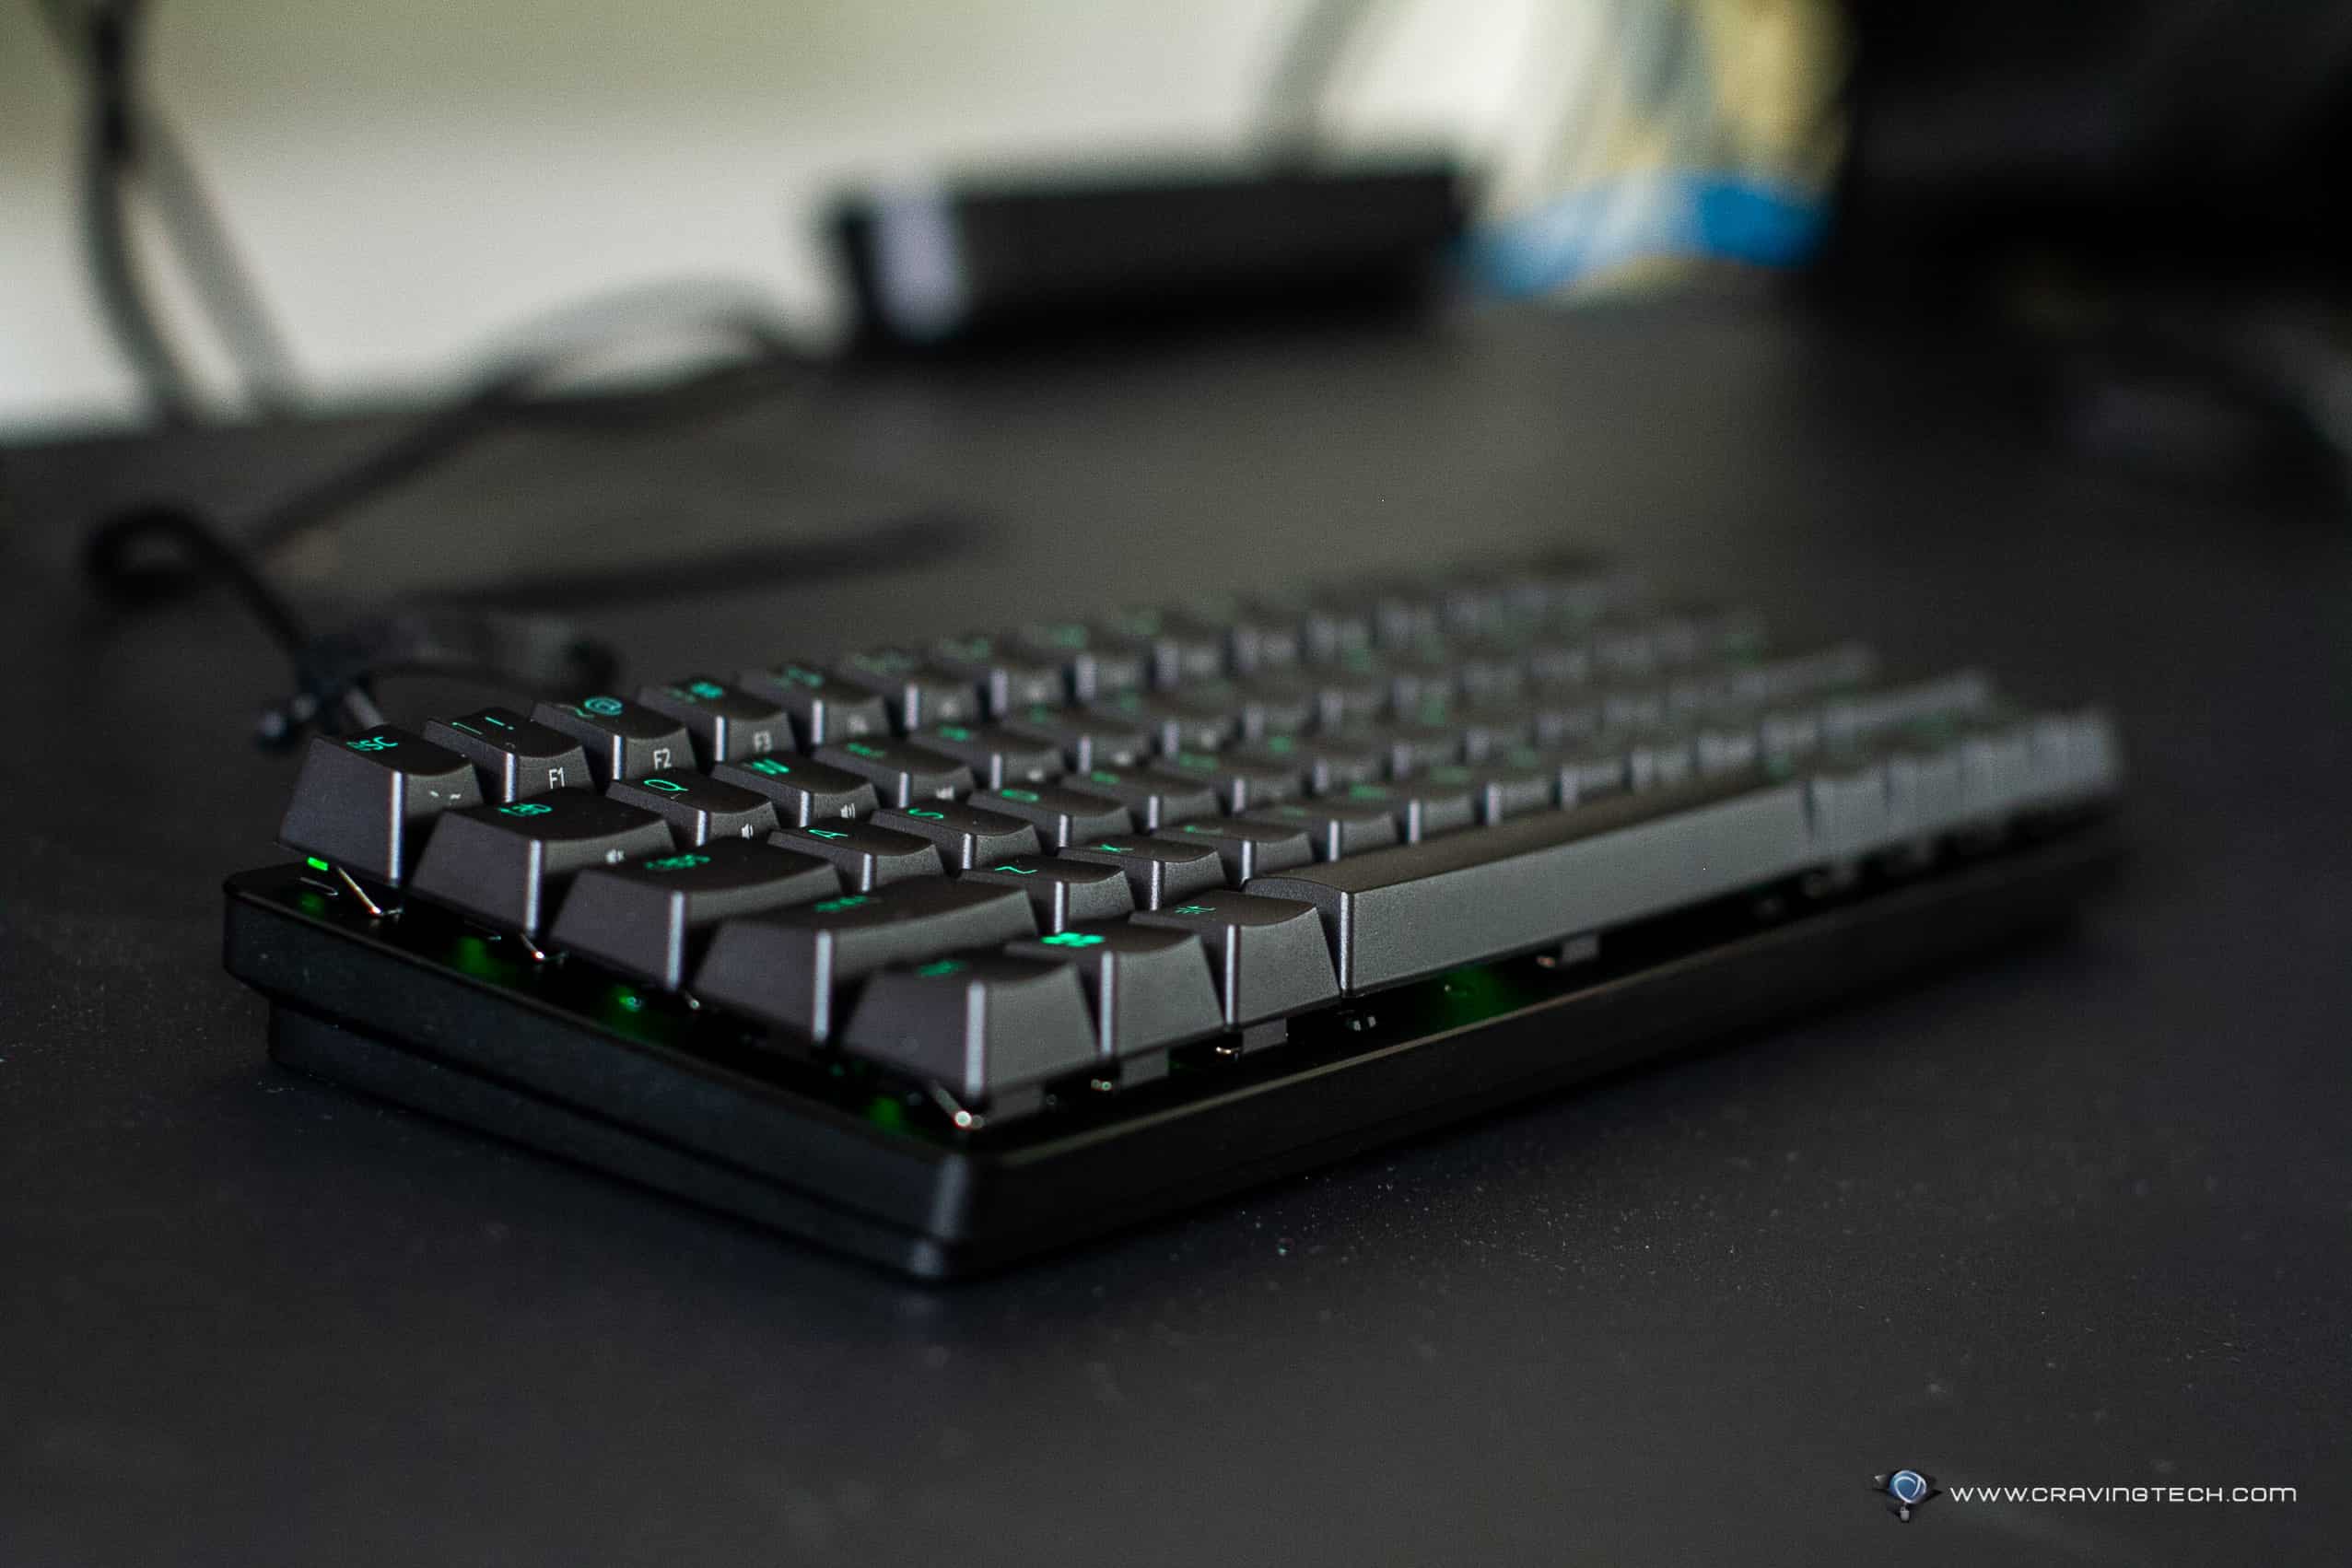 A compact gaming keyboard with customised, high precision analog switches – Razer Huntsman Mini Analog Review